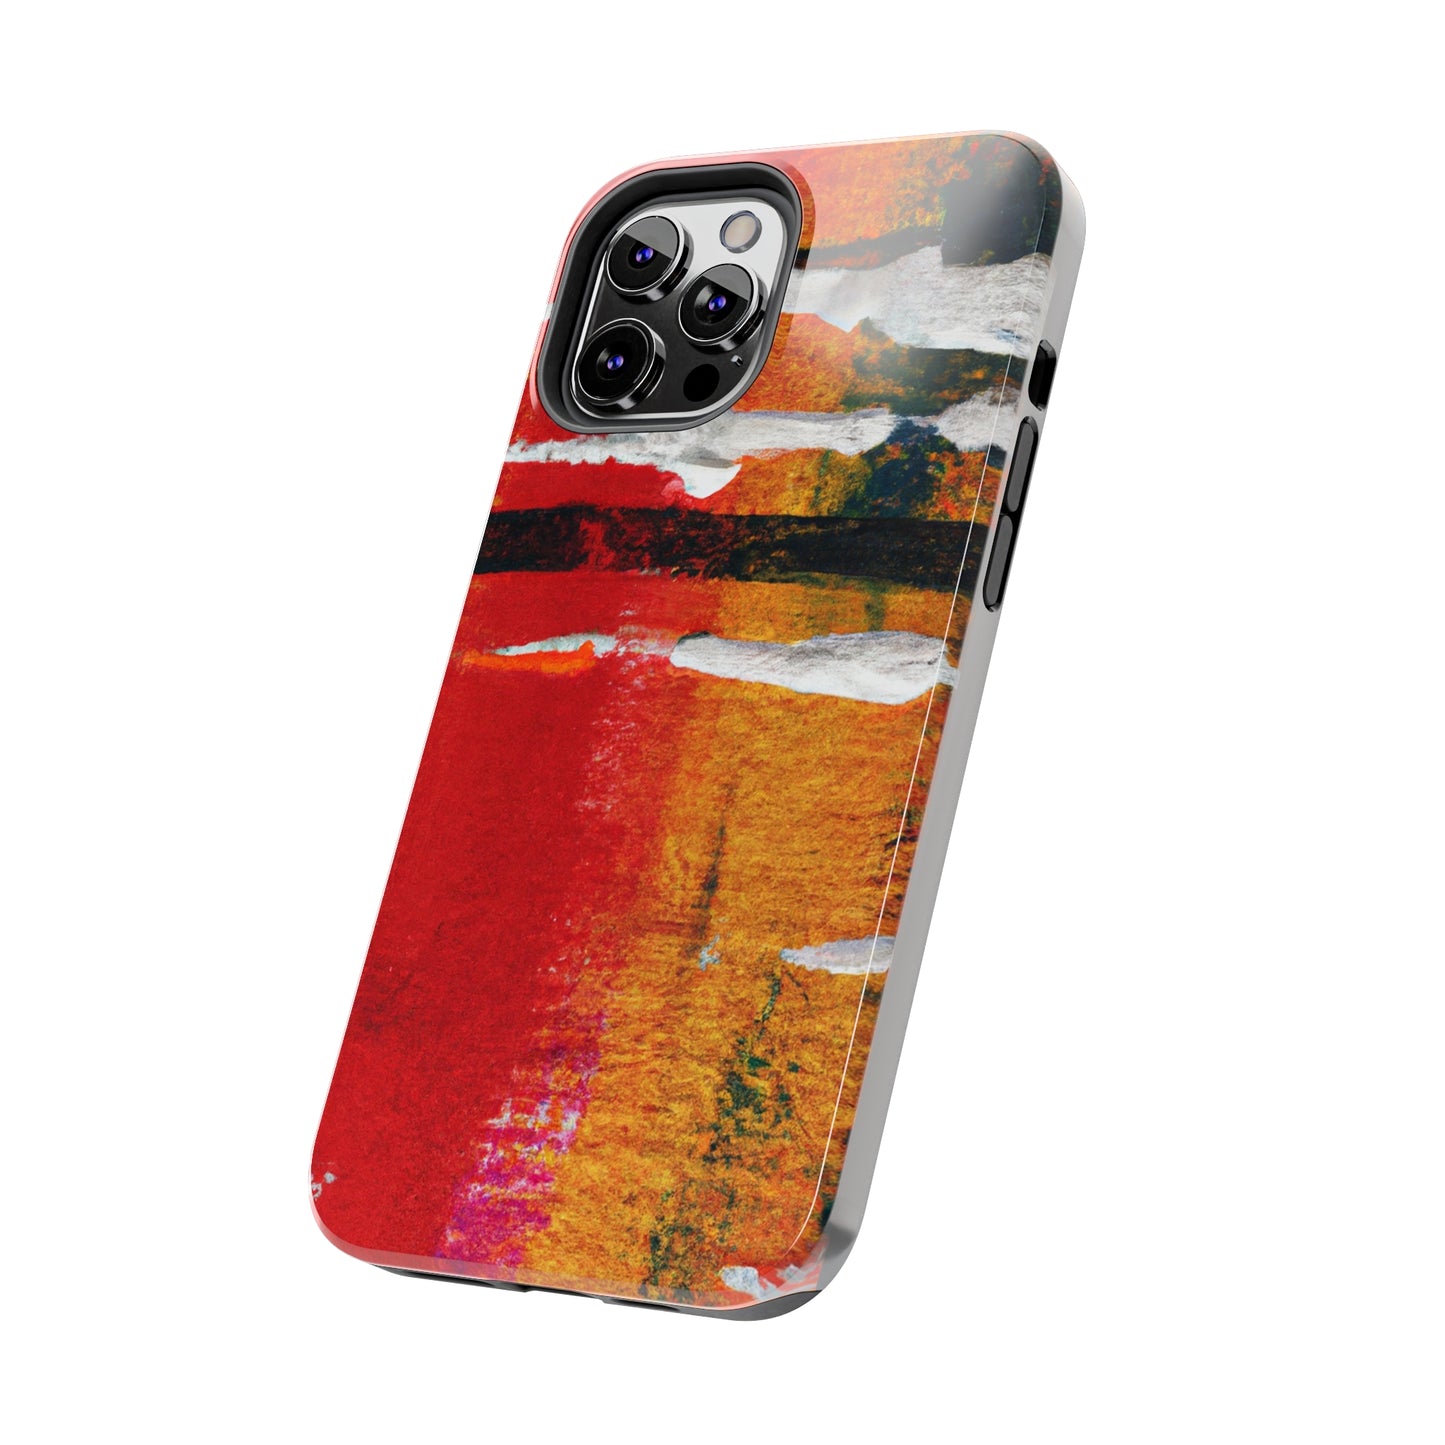 Tough Case-Mate iPhone Case Ft. Abstract New Mexico Desert